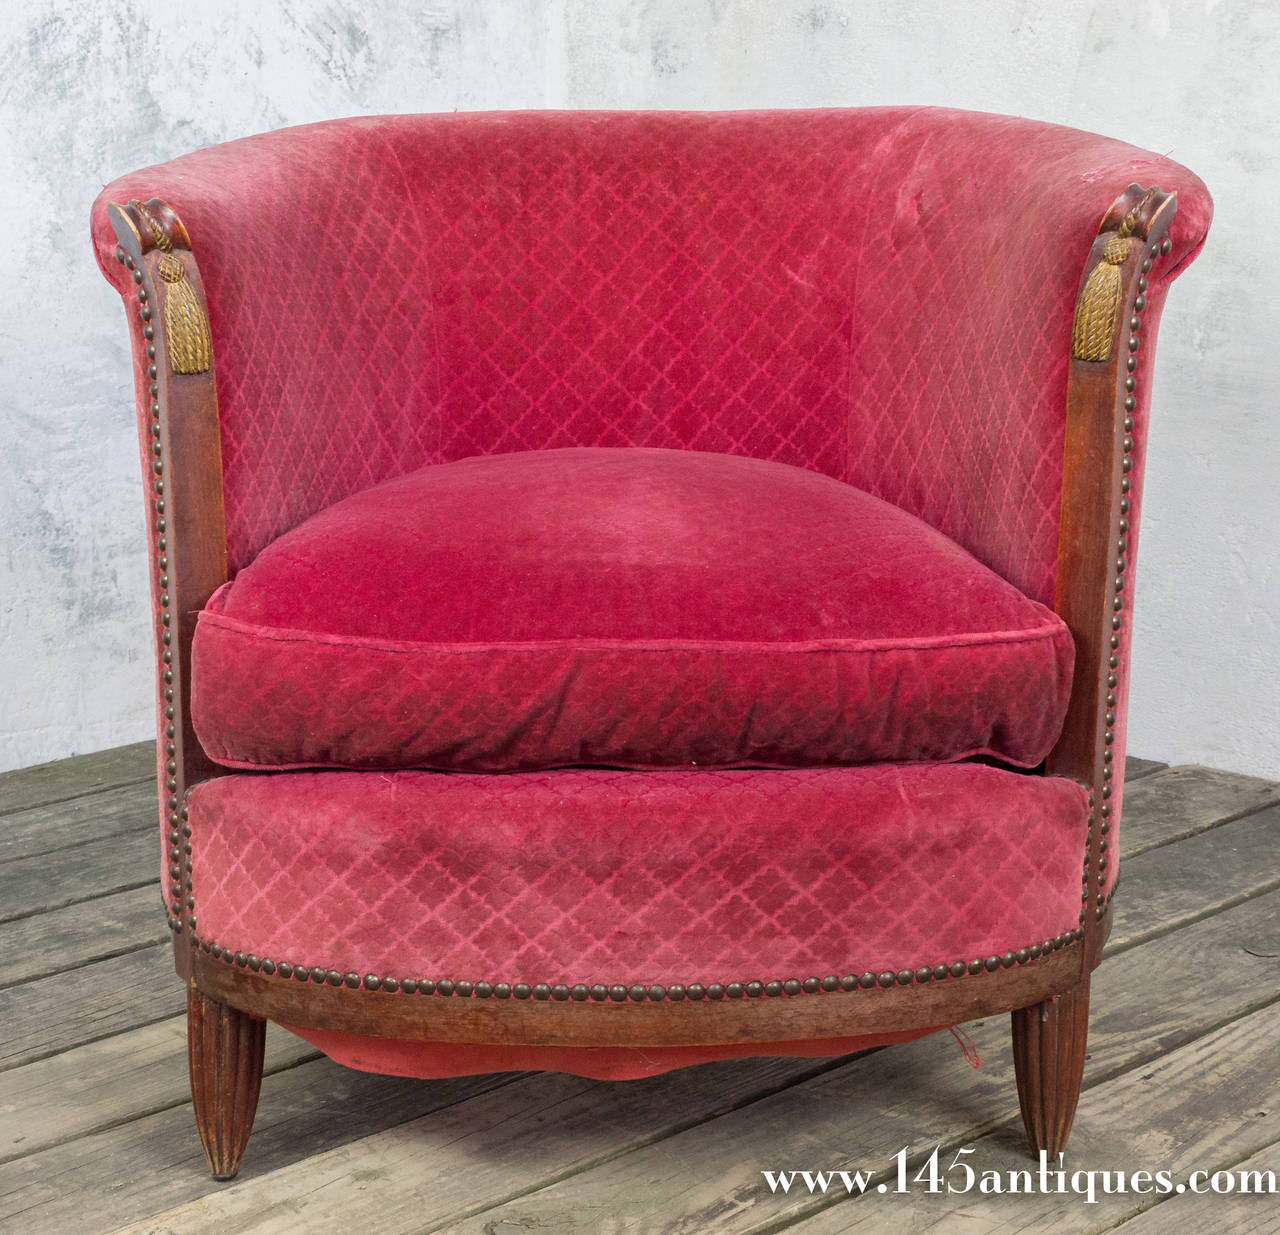 Pair of French Art Deco Armchairs in a raspberry velvet with a hatch cross design.  The legs are fluted with a gold tassel design on the arms and decorative nailheads.